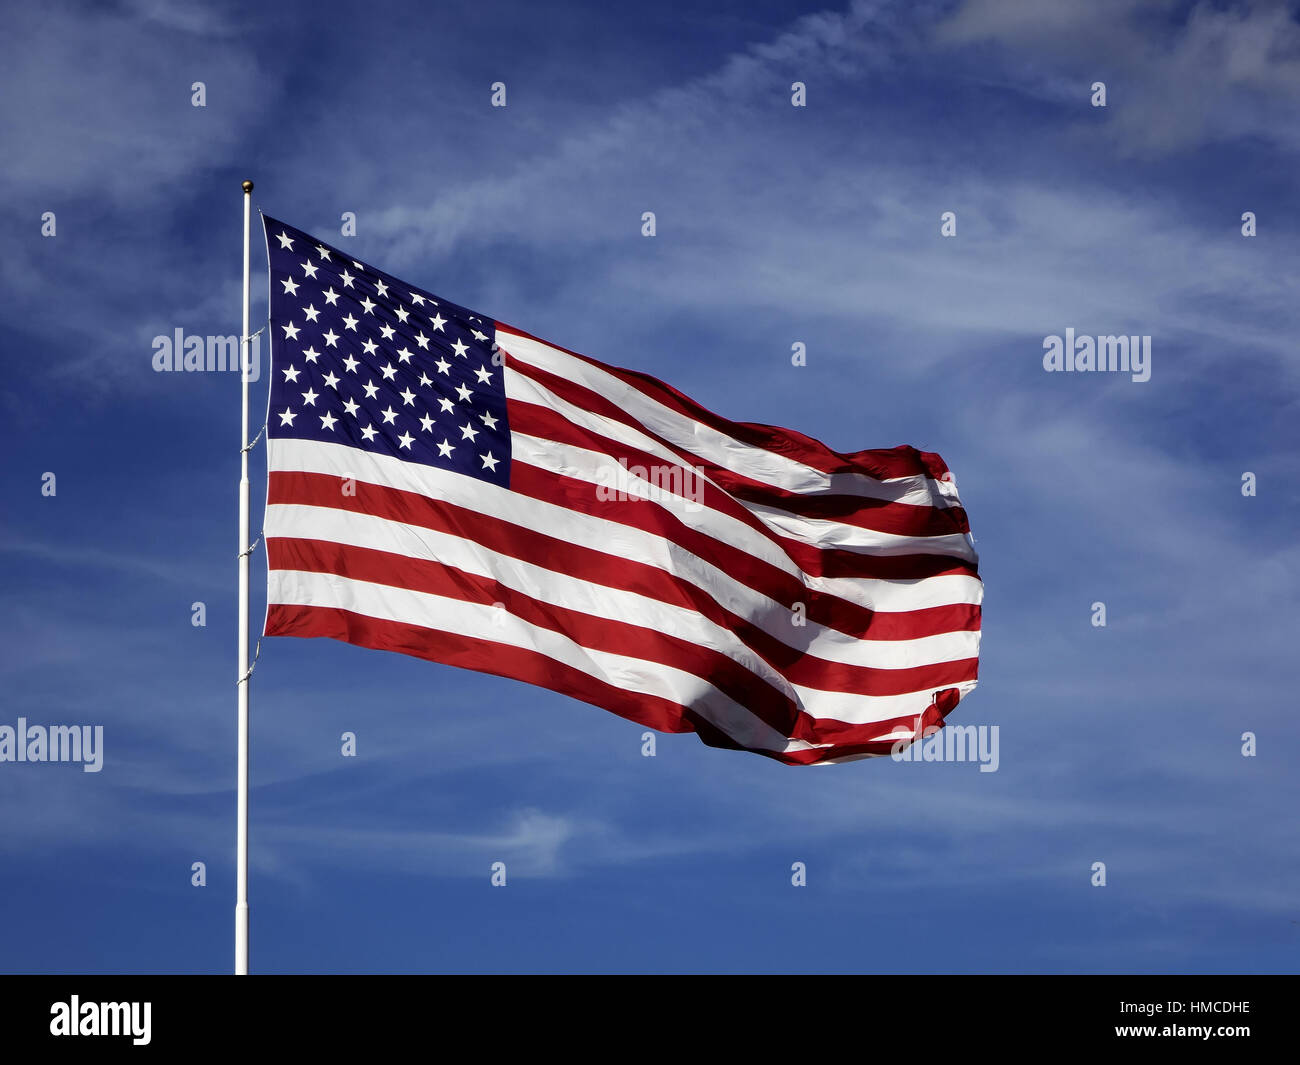 An oversized American flag raised on a flagpole waves in the wind against a blue sky background with white clouds. Stock Photo